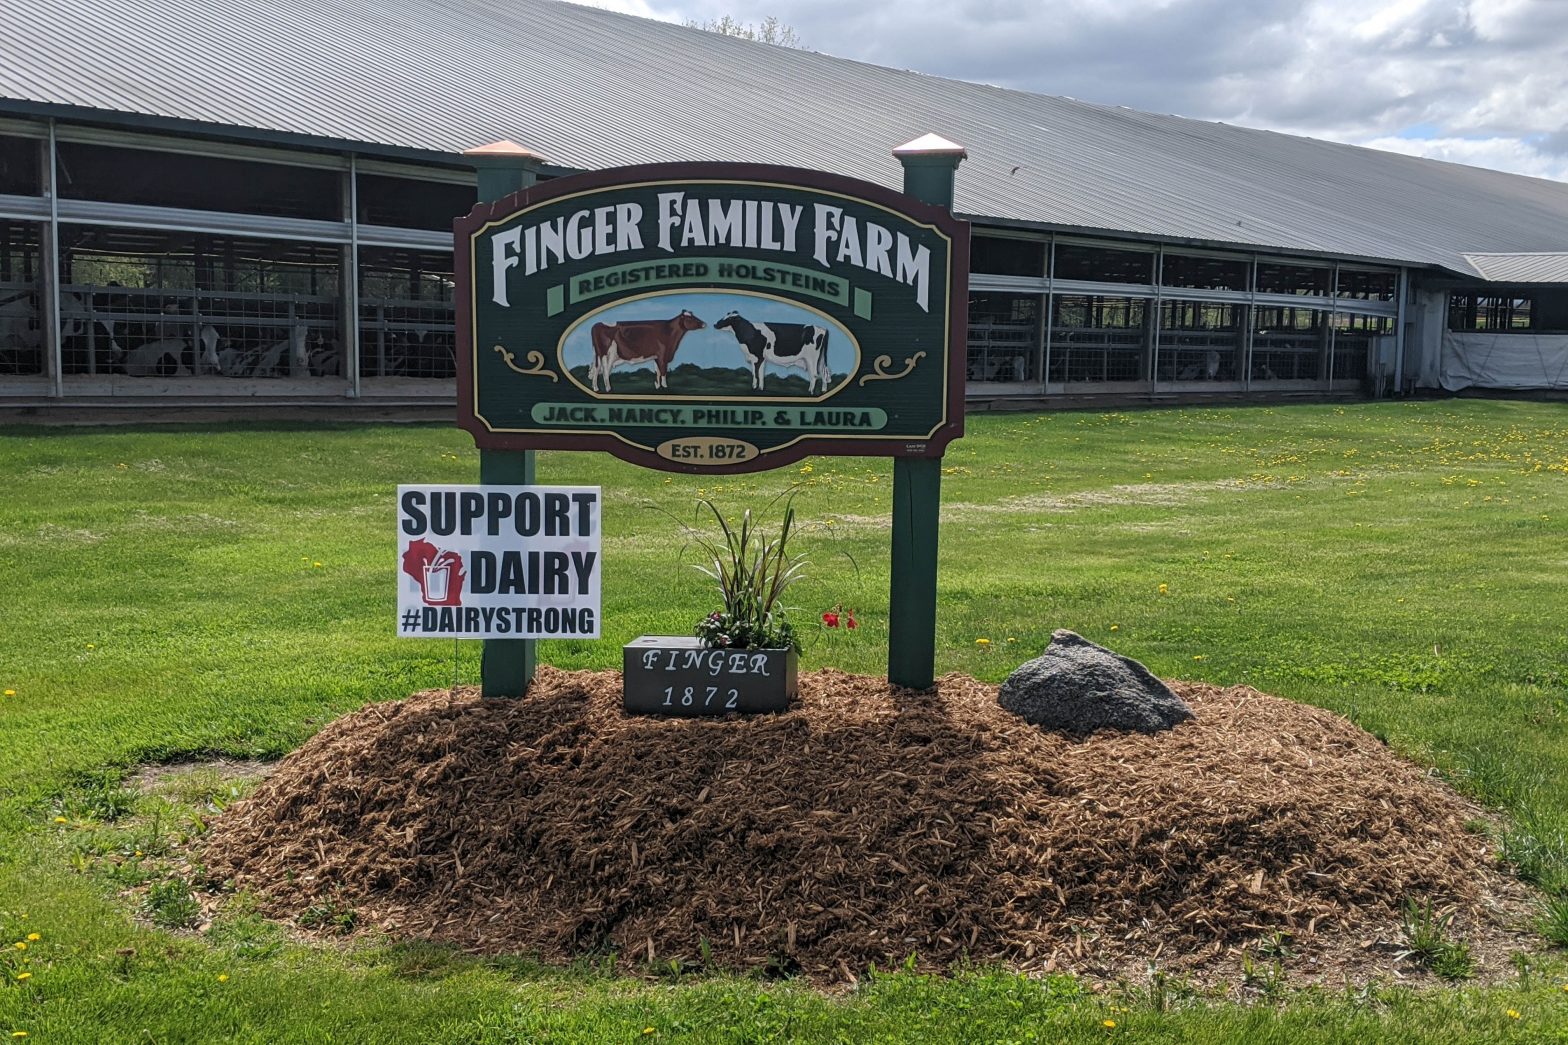 Phil and Laura Finger are fifth-generation owners of Finger Family Farm, LLC in Peshtigo, Wisconsin.  In addition to many other farm responsibilities, Laura works as the farm’s calf manager and does almost all the calf feedings.